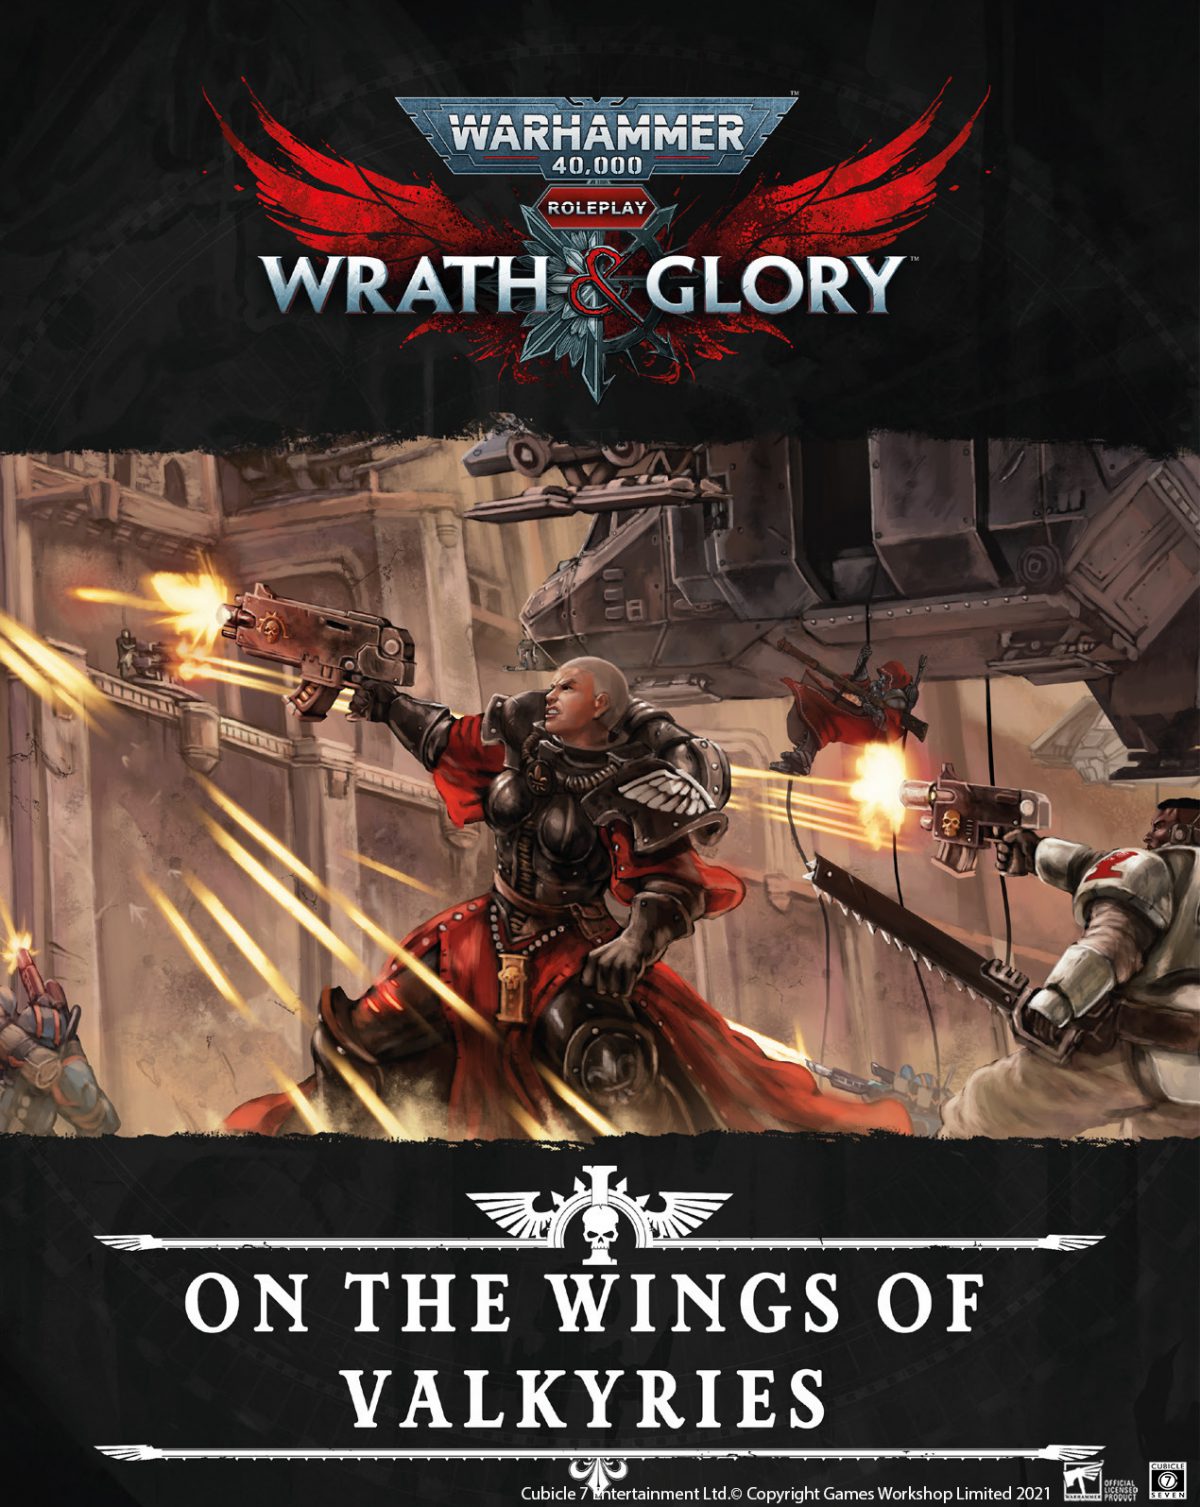 On The Wings Of Valkyries - Wrath & Glory